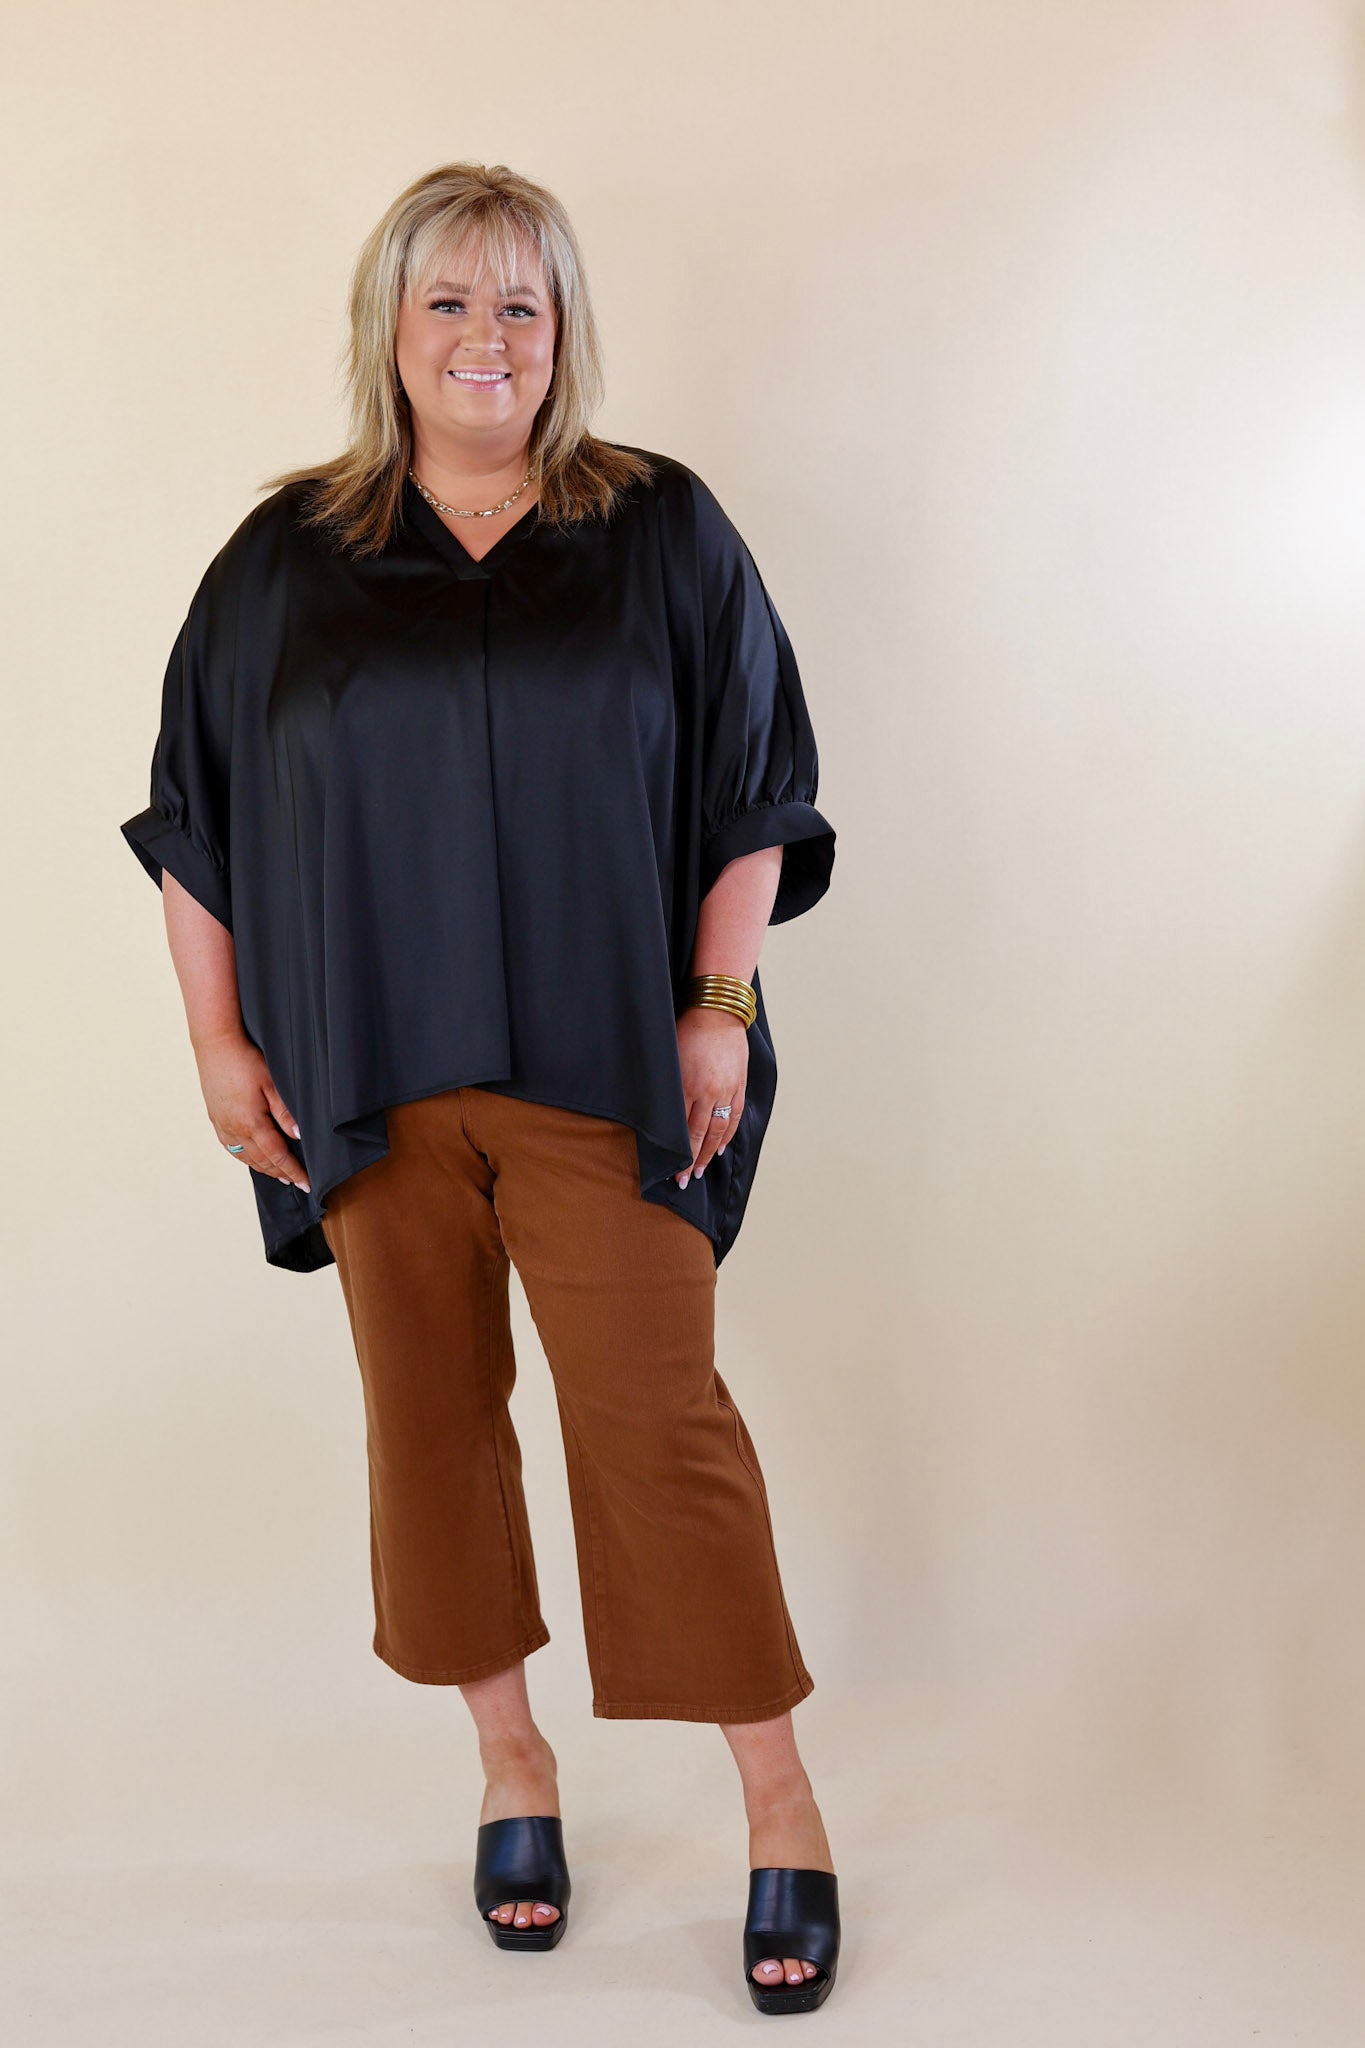 Irresistibly Chic Half Sleeve Oversized Blouse in Black - Giddy Up Glamour Boutique